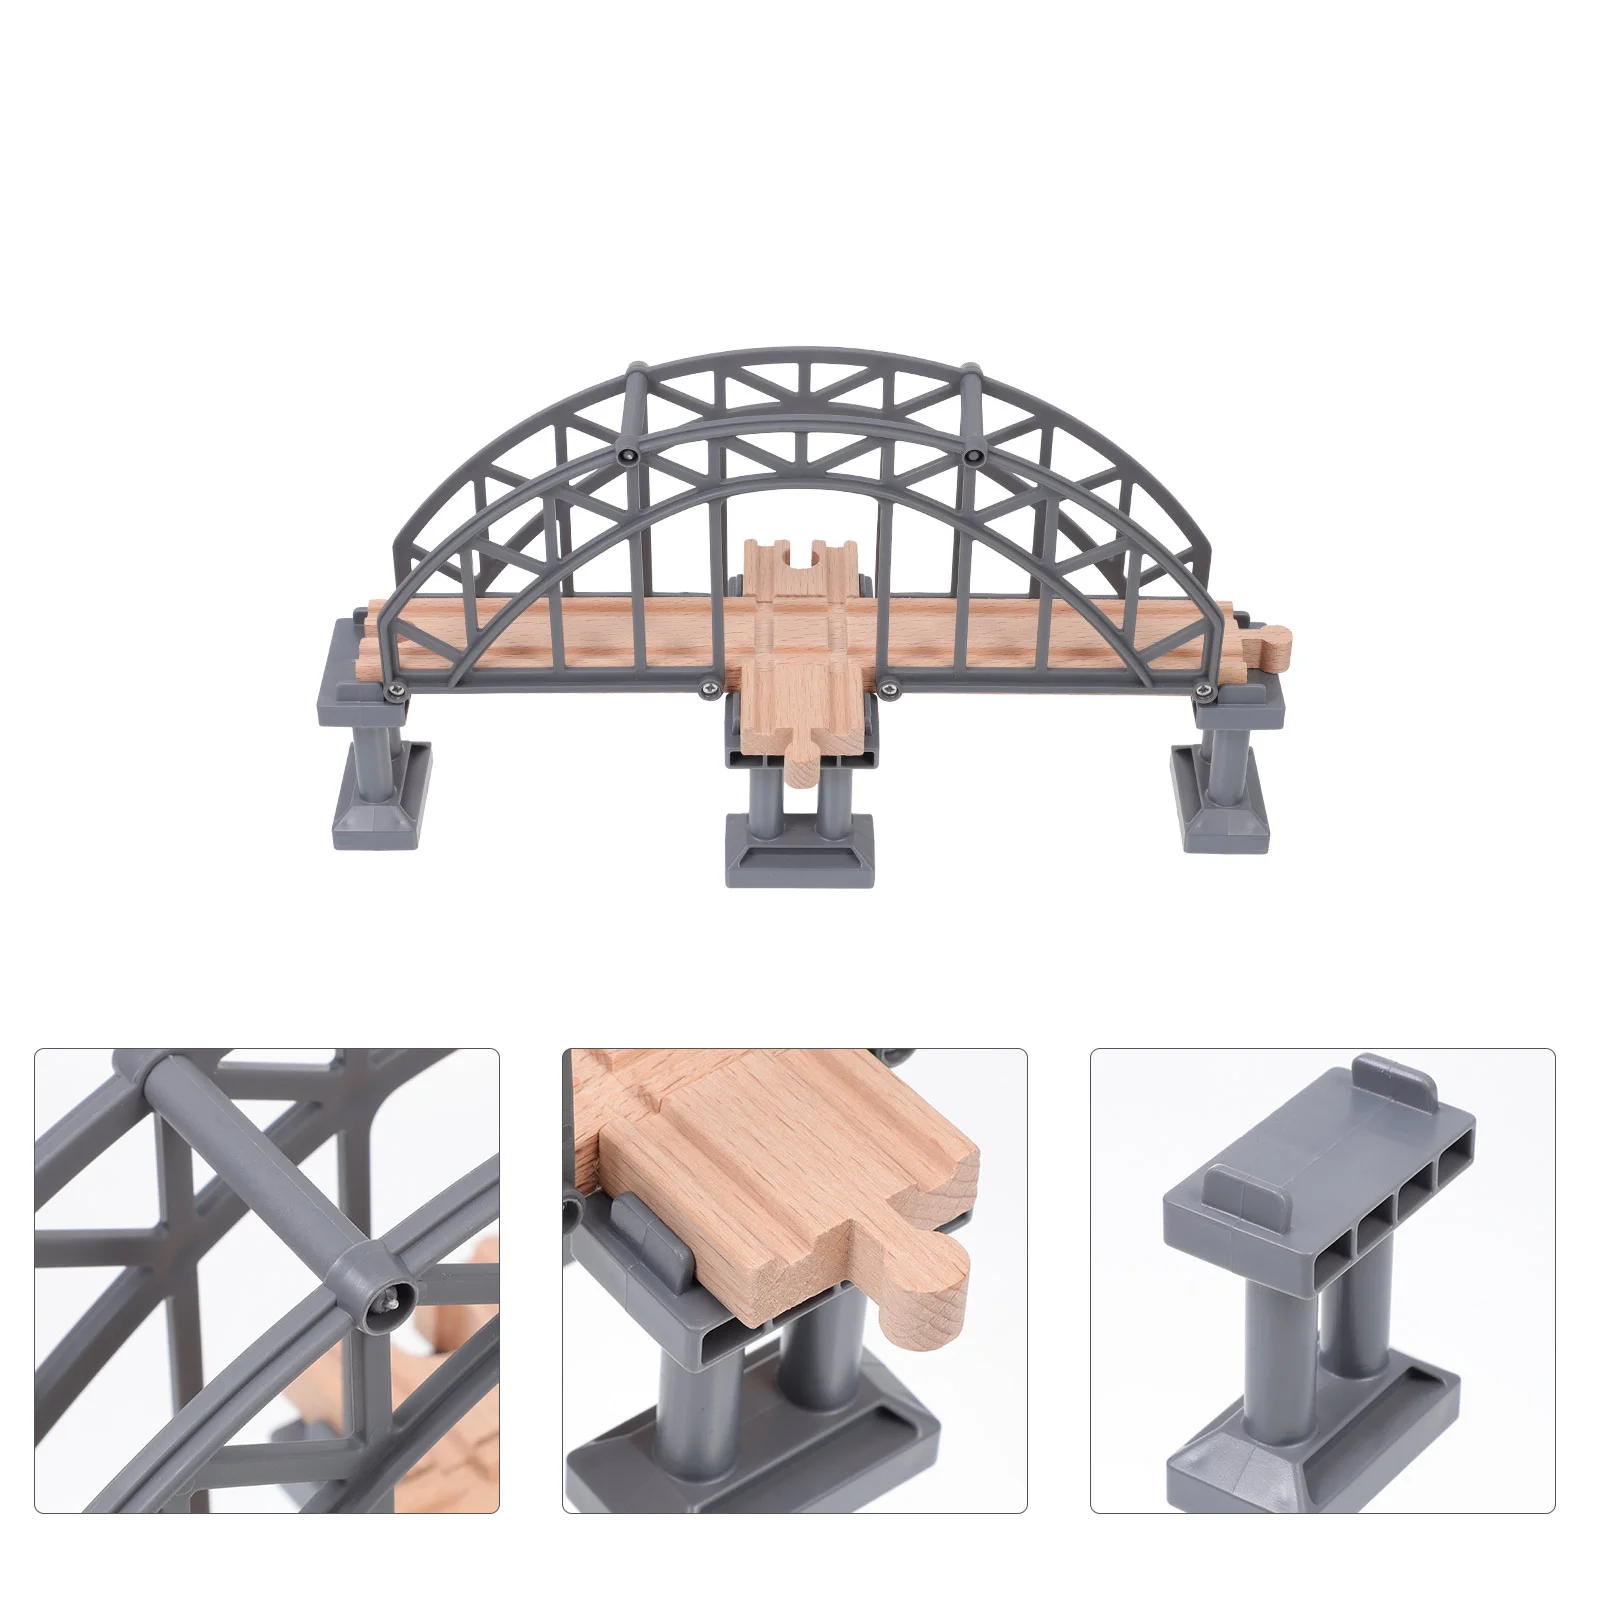 

Train Scene Toy Children Railway Accessory Wooden Toys Babies Plastic Bridge Educational Baby Cognitive Plaything